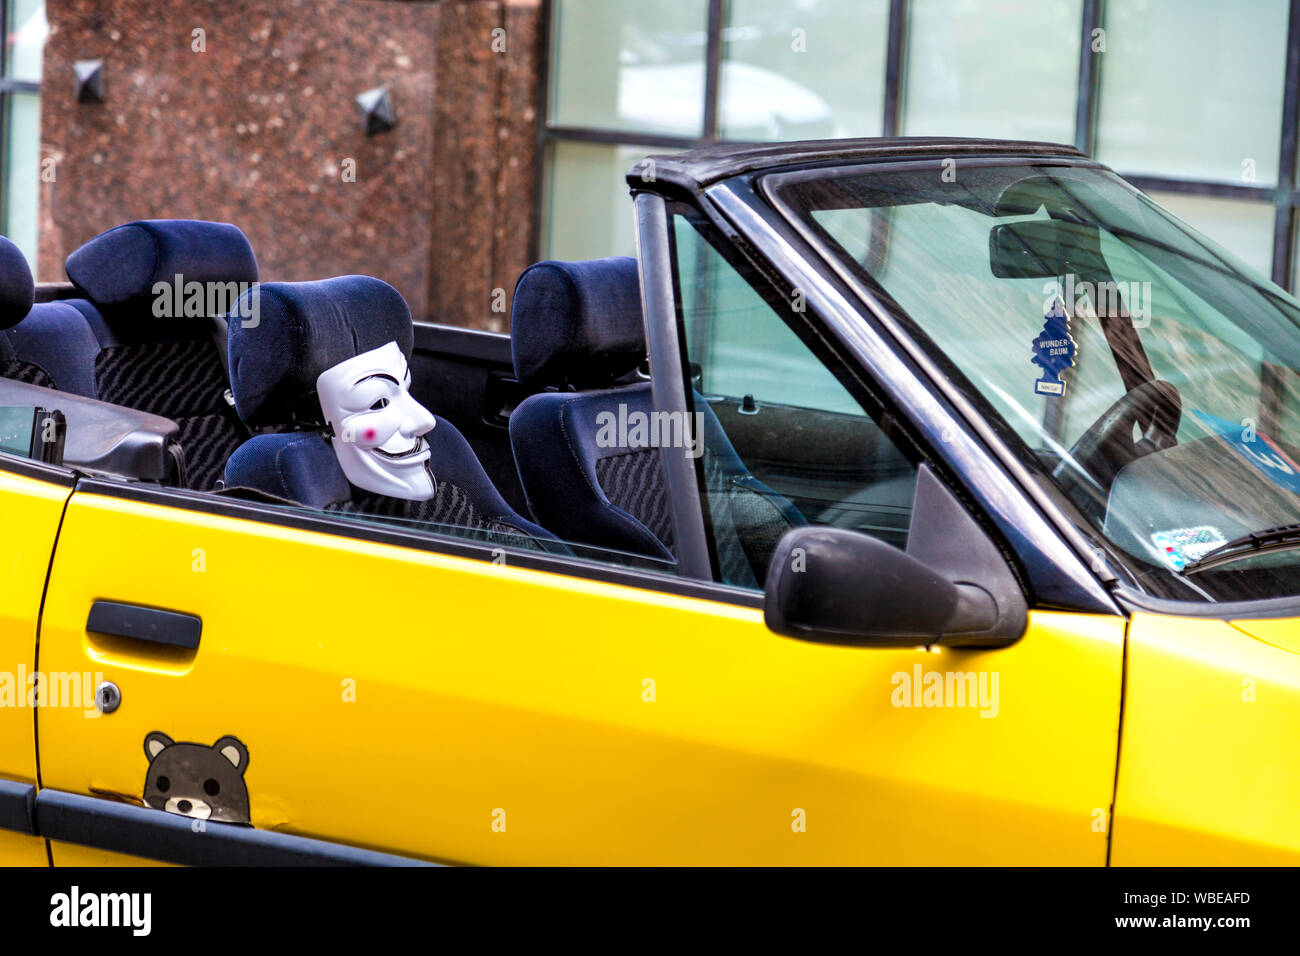 Yellow cabriolet car parked on the street with a V for Vendetta mask attached to the seat, Warsaw, Poland Stock Photo